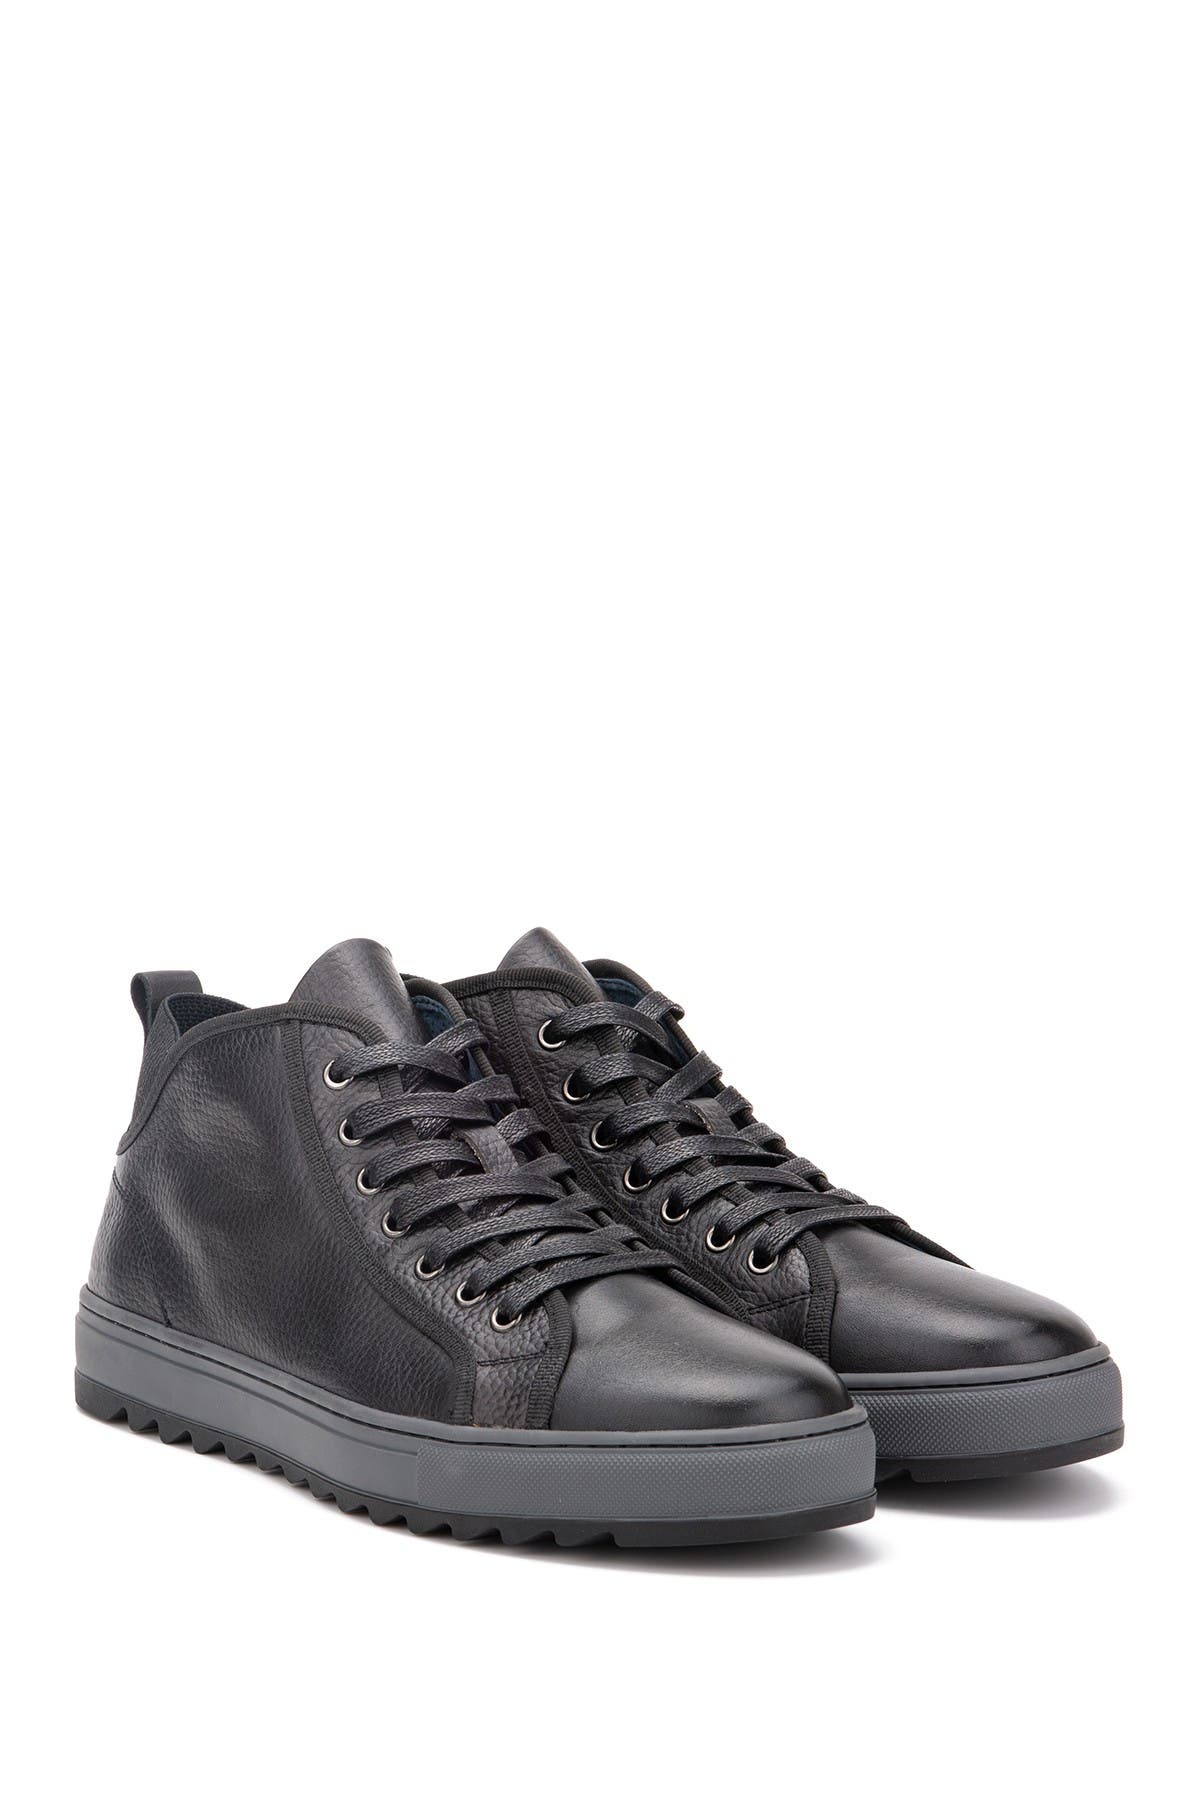 Vintage Foundry | Newman Leather Mid Top Sneaker | Nordstrom Rack